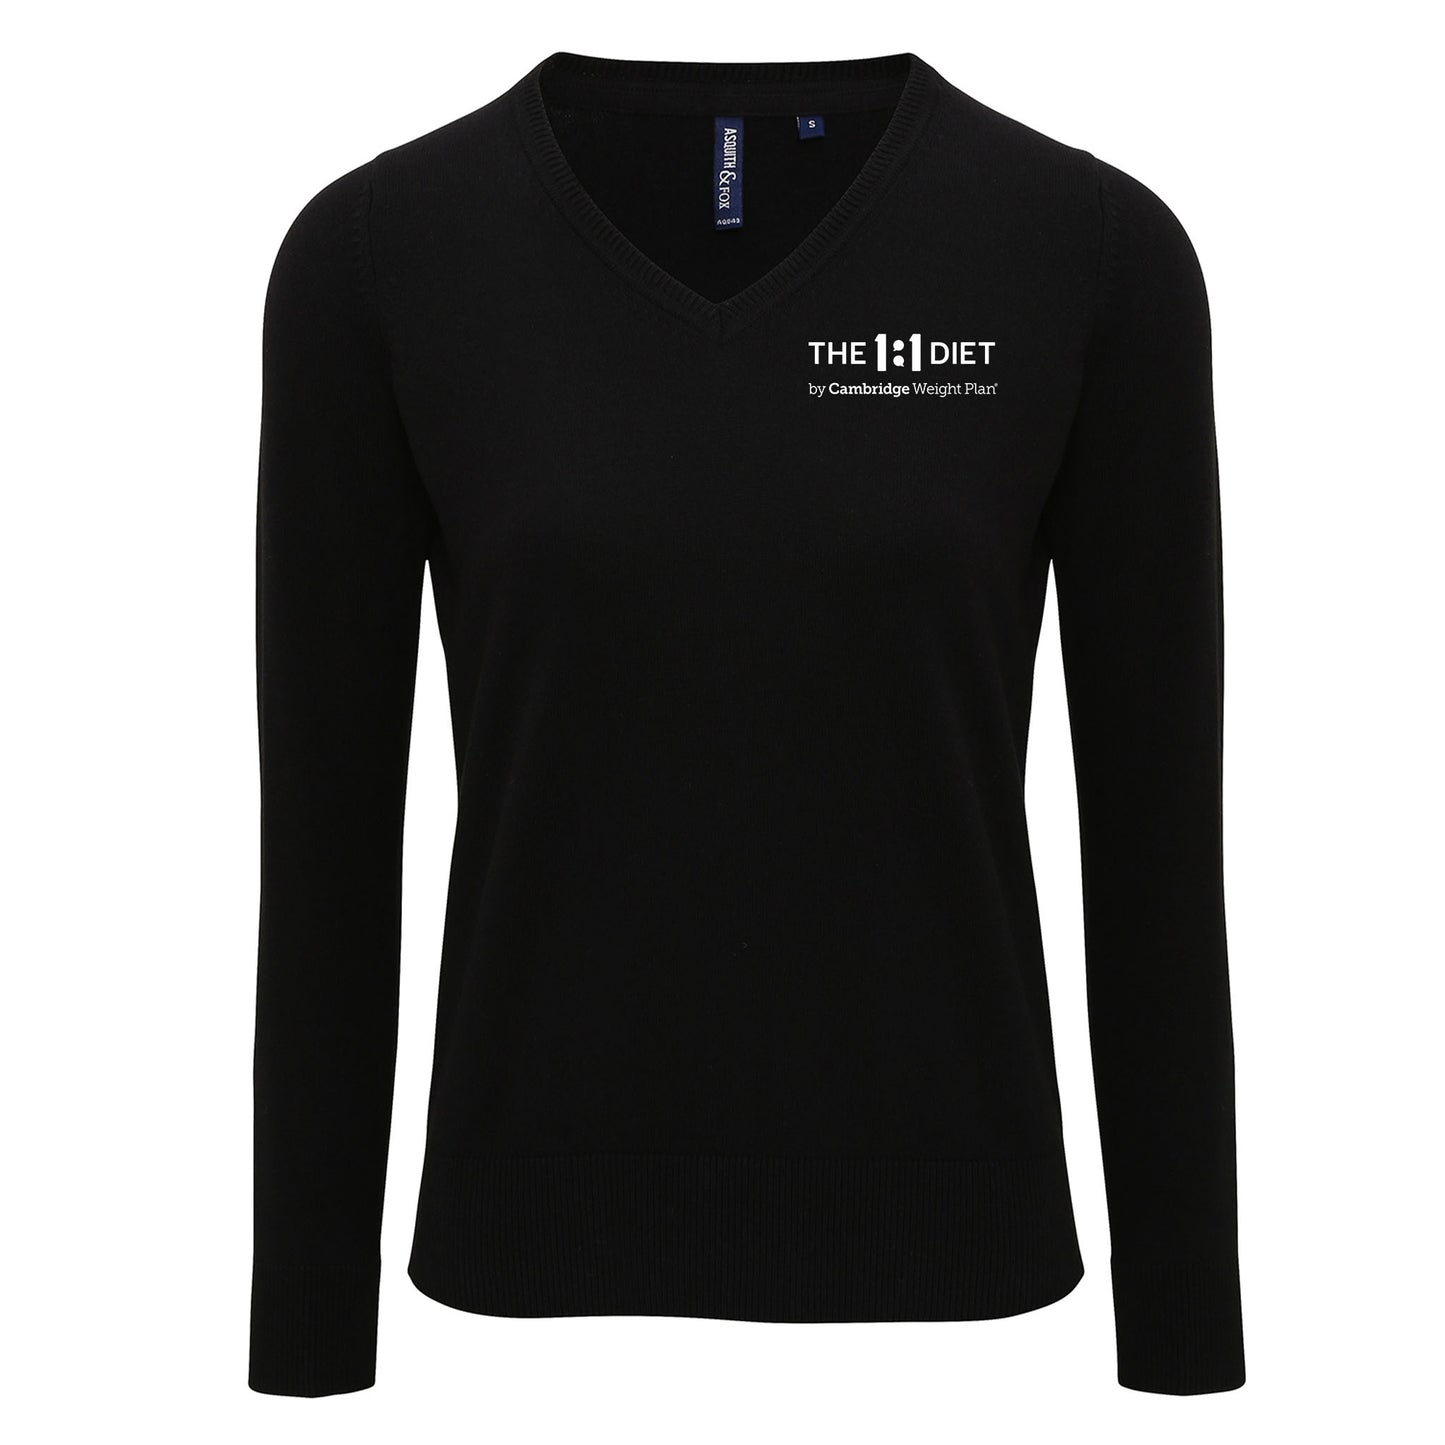 The 1:1 Diet - CLEARANCE - Ladies Cotton Blend V-neck Sweater